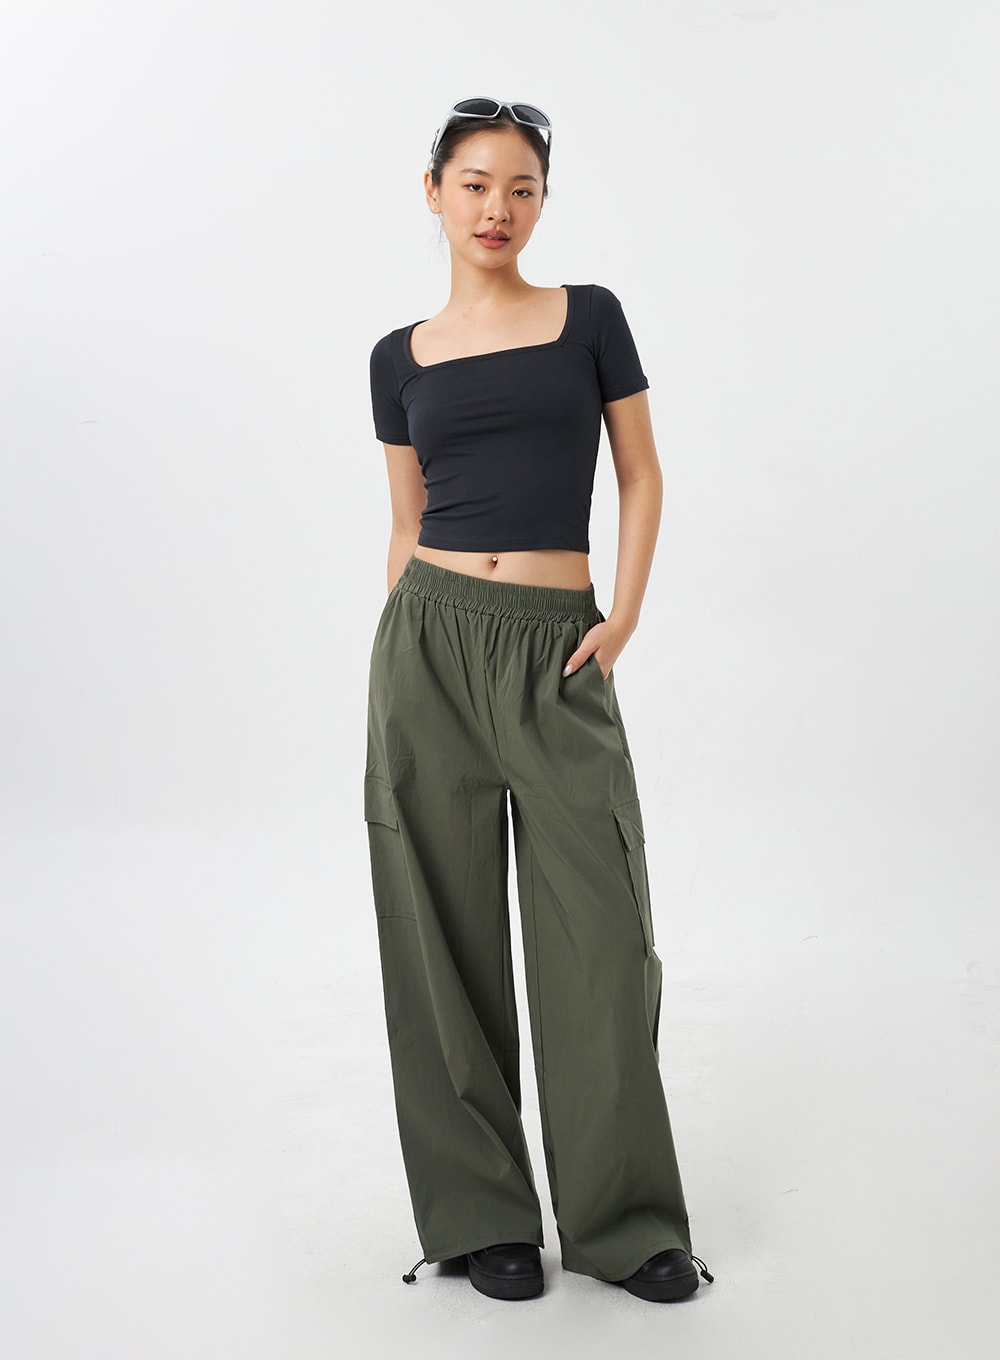 in a row】[Unisex] Wide Cargo Training Pants